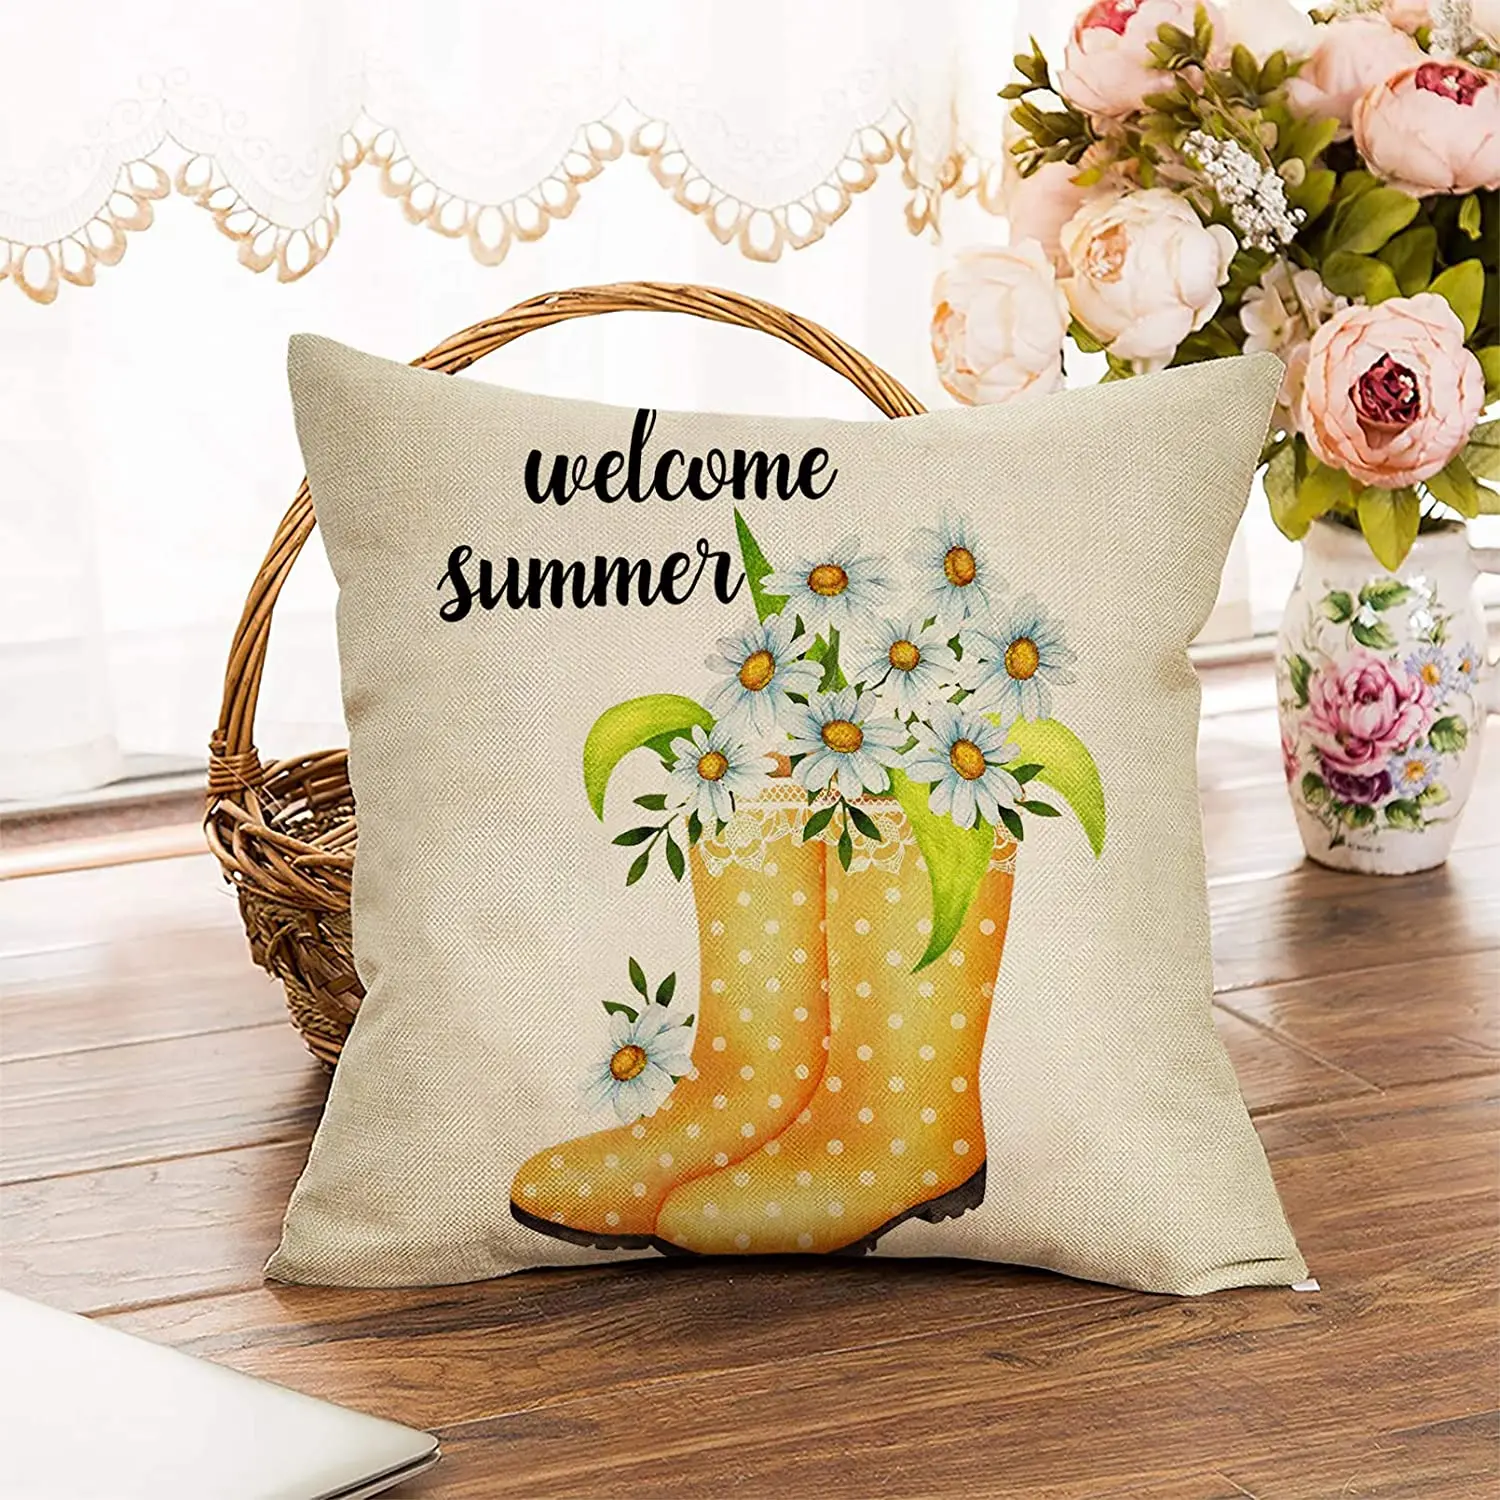 Seasonal Home Decorations Cotton Linen Spring Square Outside Pillowcase Decor Sign for Sofa Couch 18 x 18 Softxpp Welcome Summer Decorative Throw Pillow Cover Daisy Flowers Rain Boots Cushion Case 